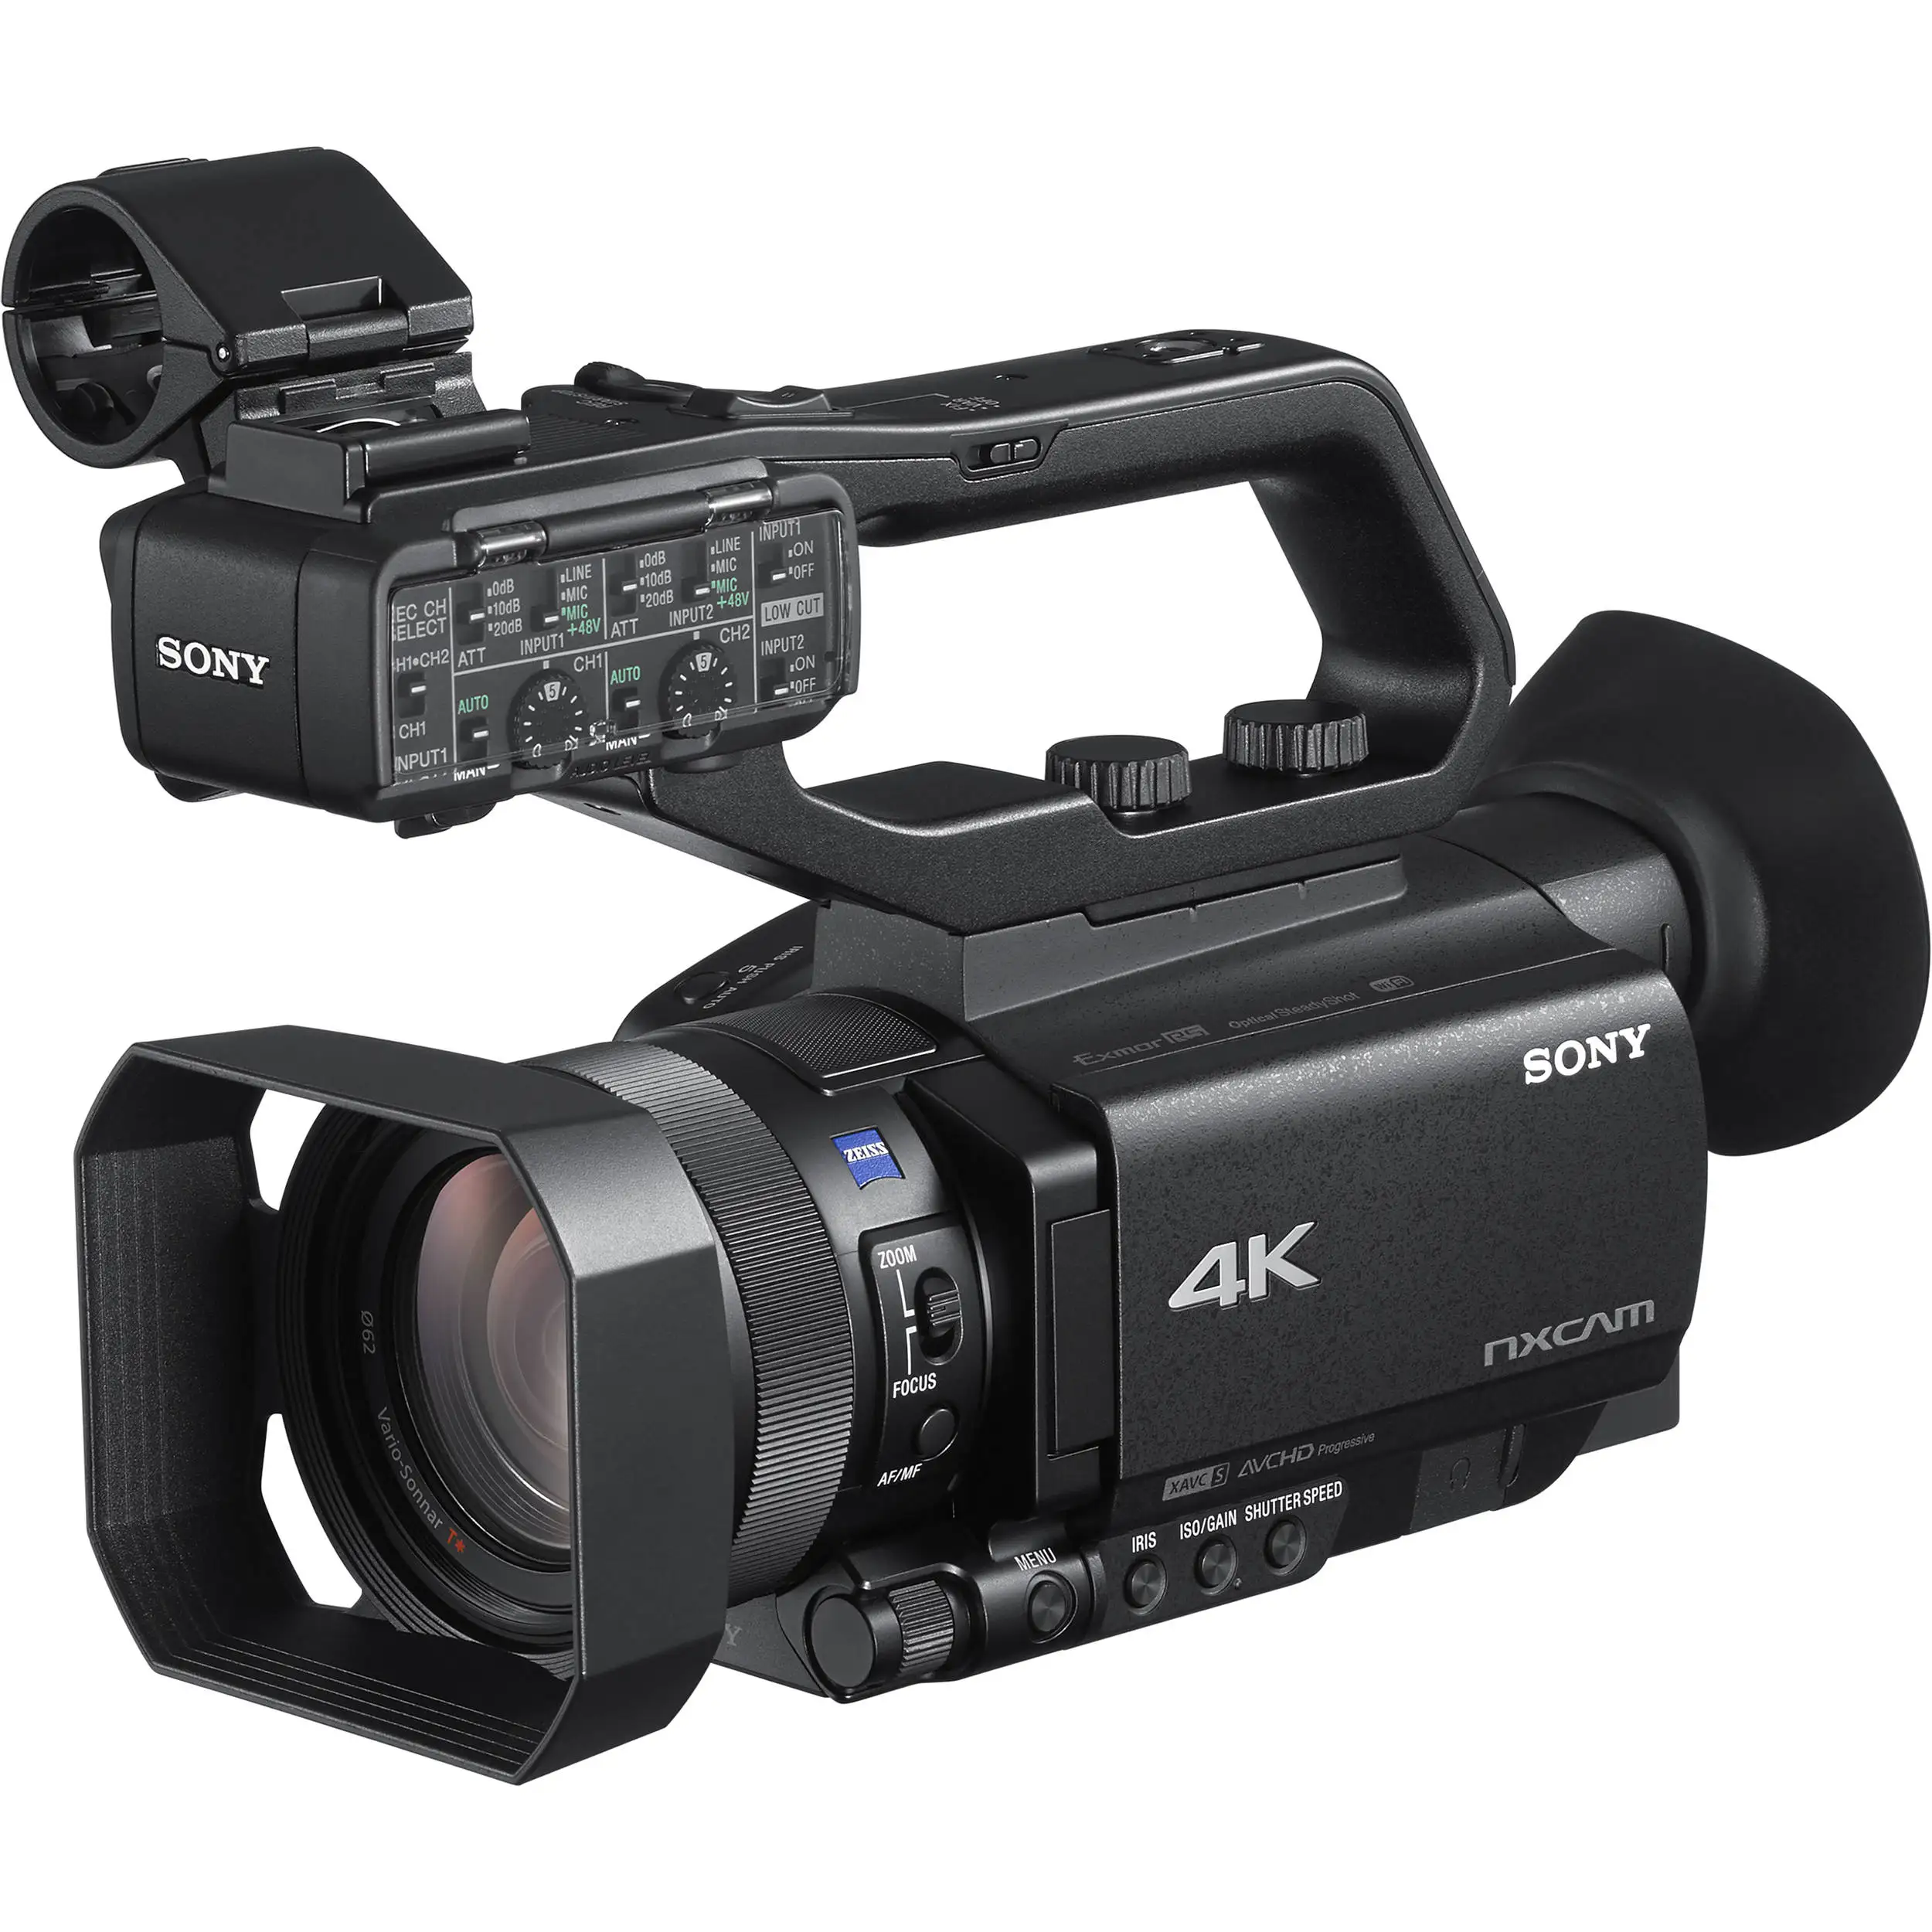 

SUMMER SALES DISCOUNT ON AUTHENTIC HXR-NX100 Full HD NXCAM Camcorder